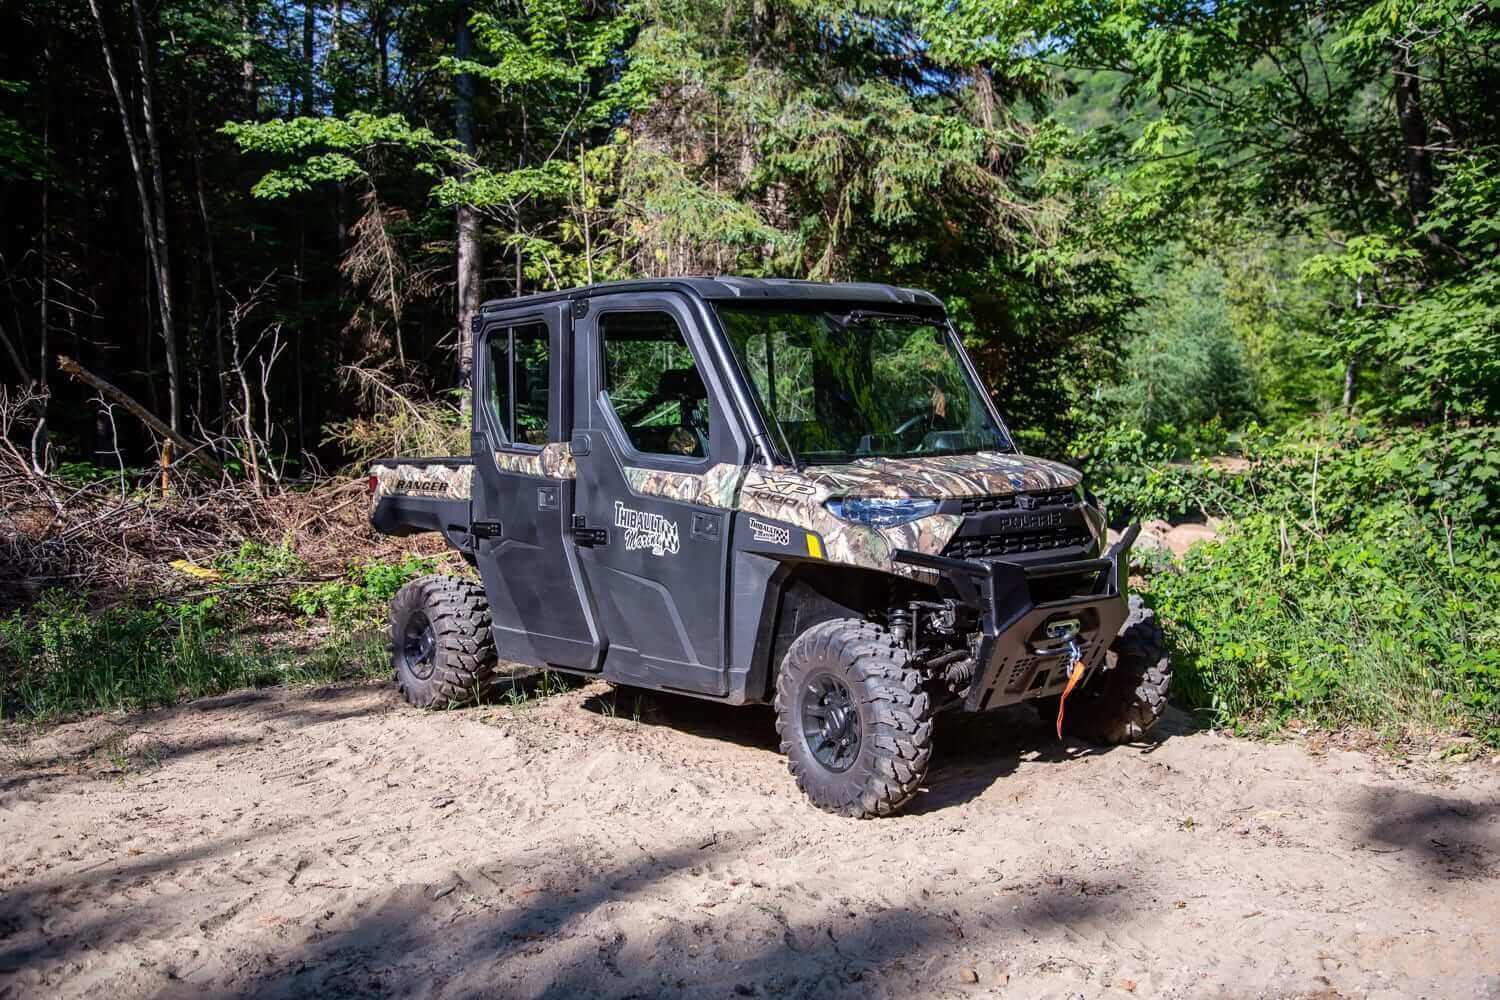 Camo Polaris Ranger Crew XP 1000 in forest, demonstrating why it's the best side by side vehicle